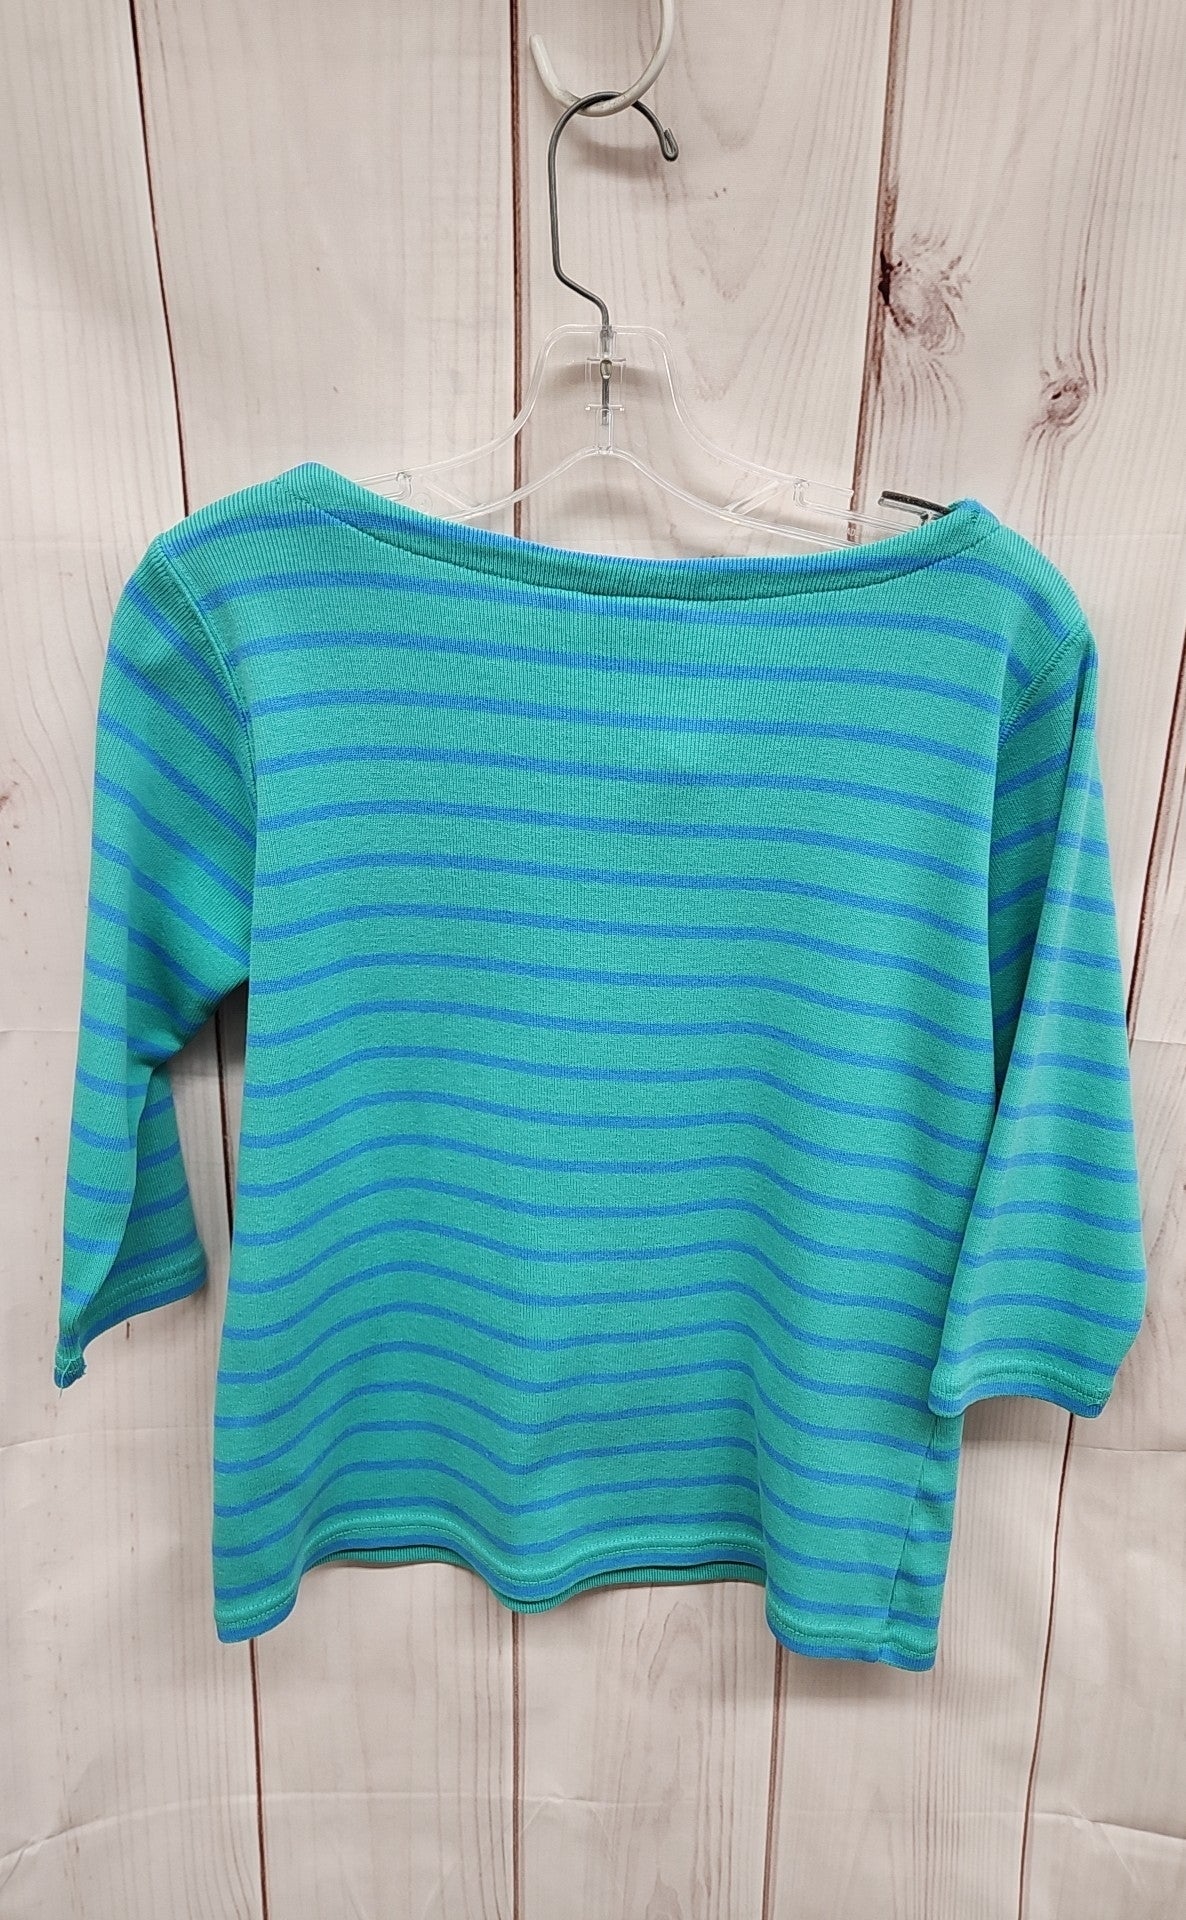 LL Bean Women's Size M Petite Turquoise 3/4 Sleeve Top